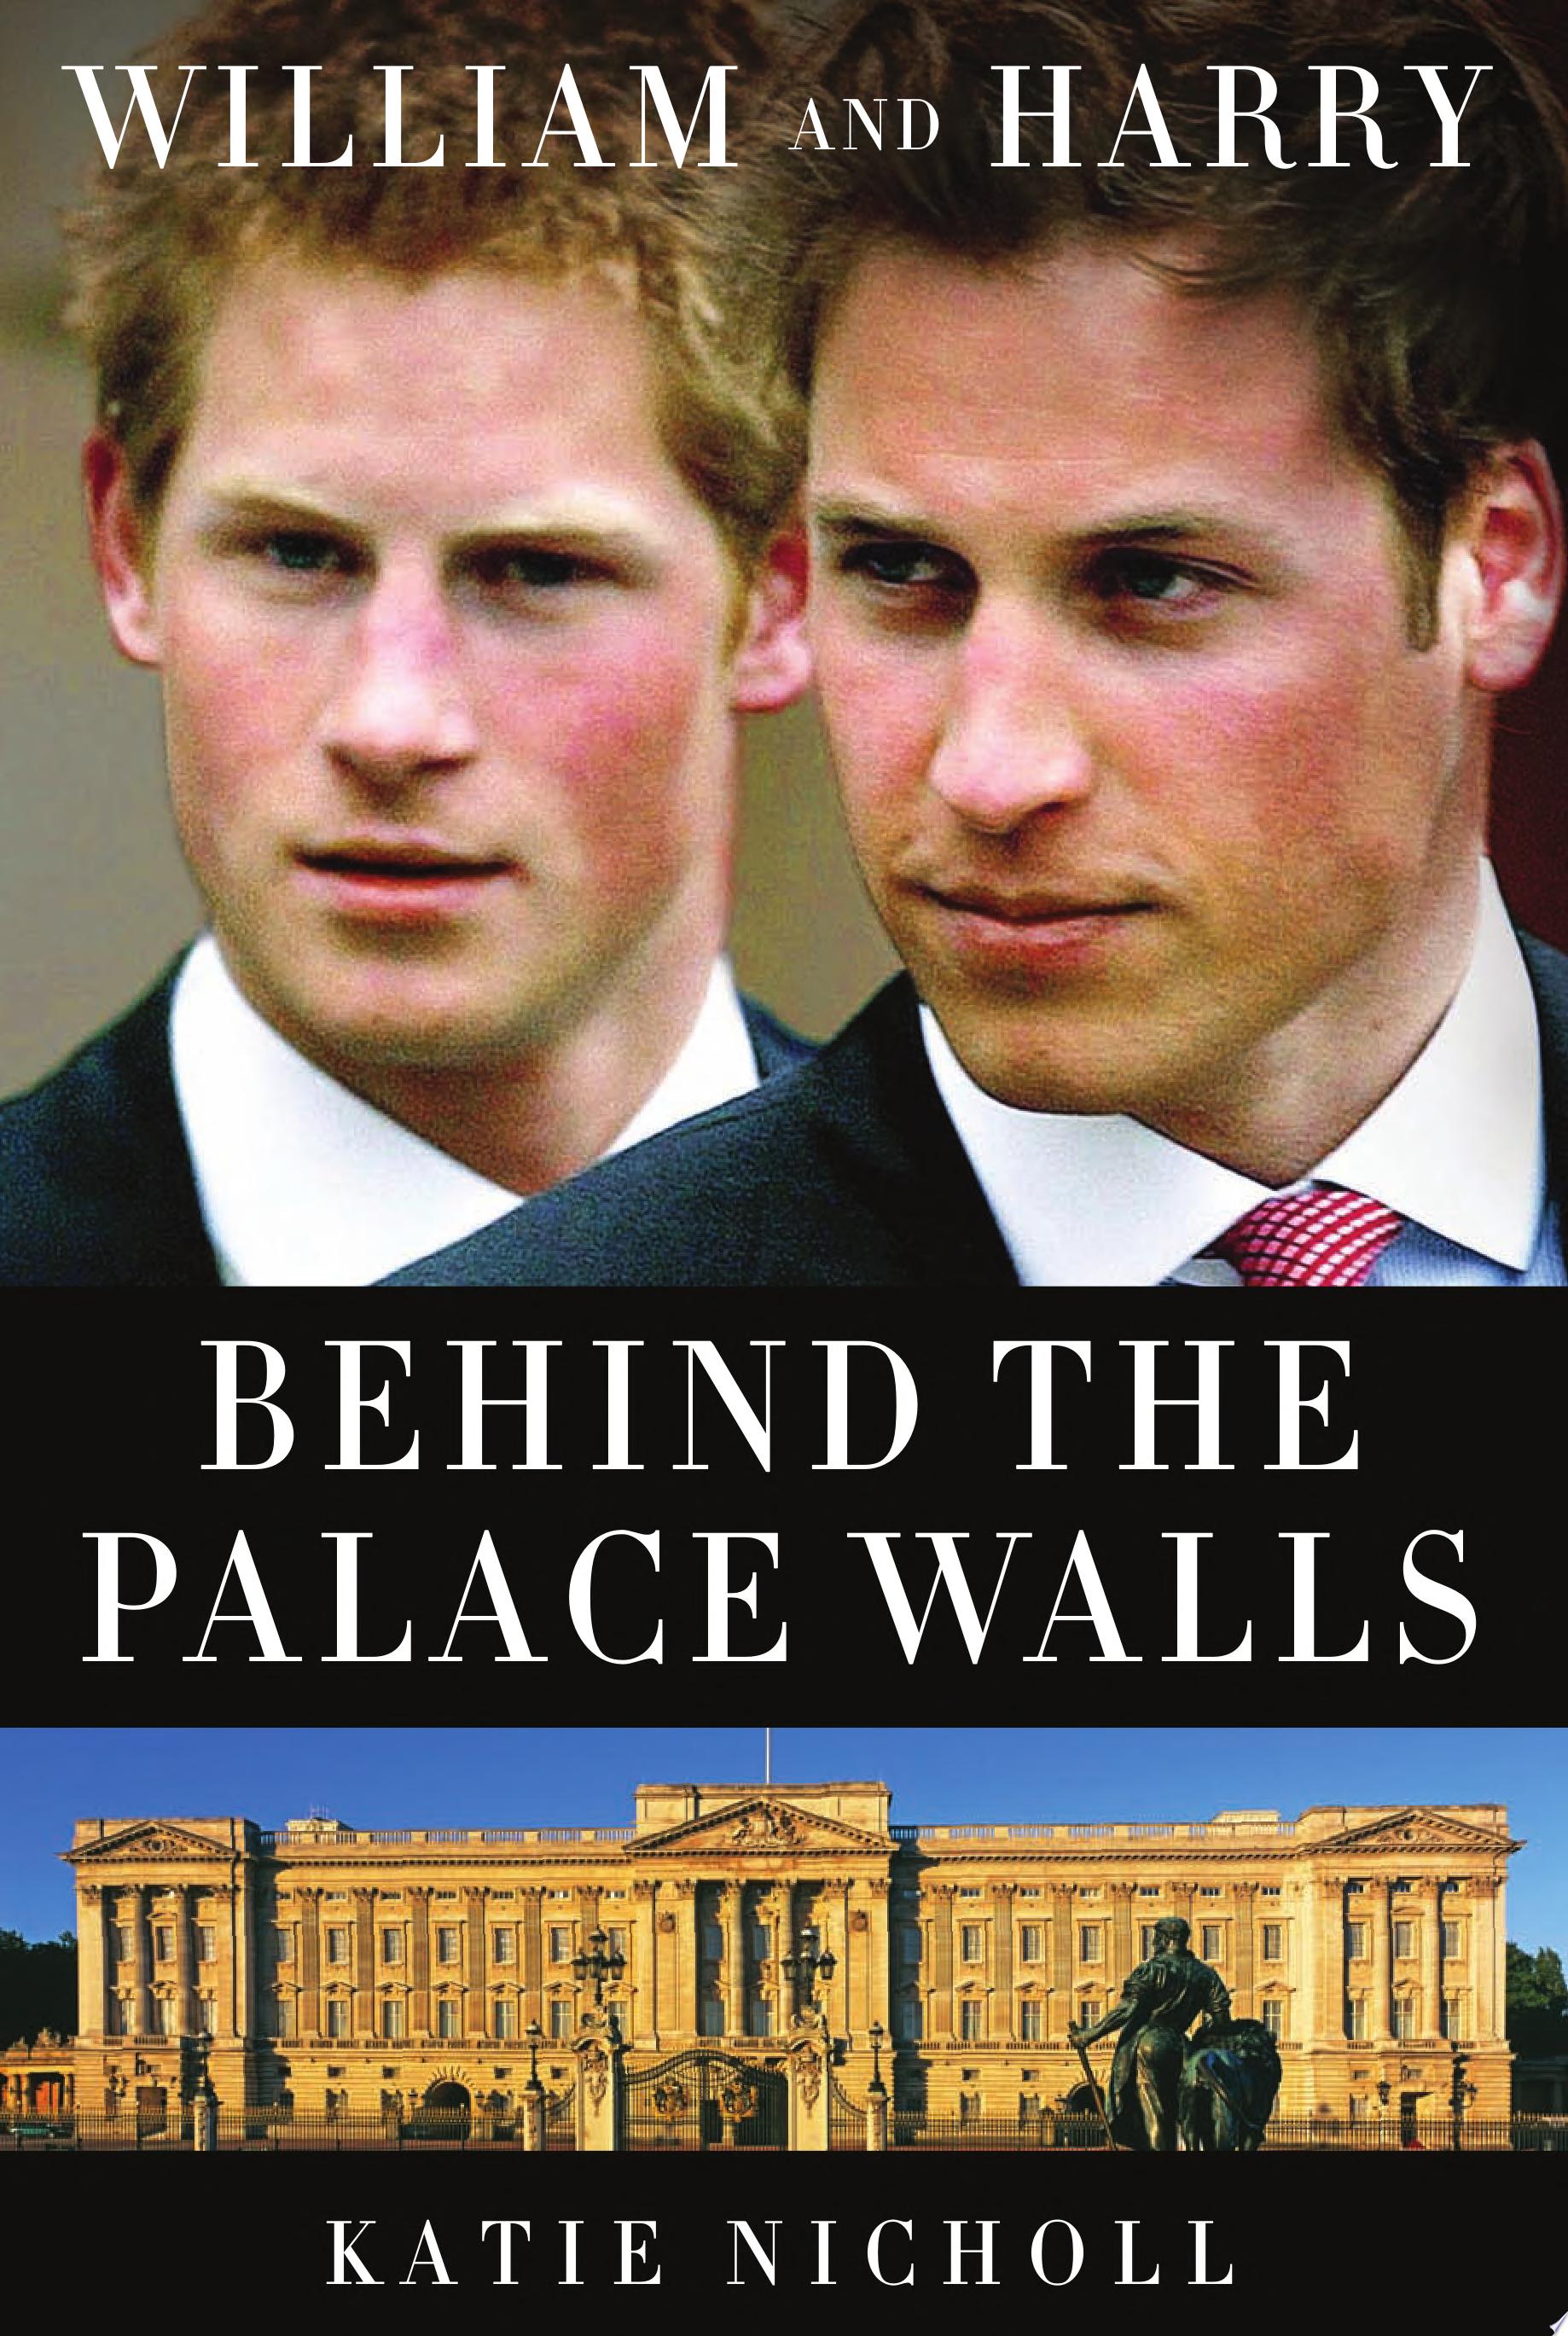 Image for "William and Harry"